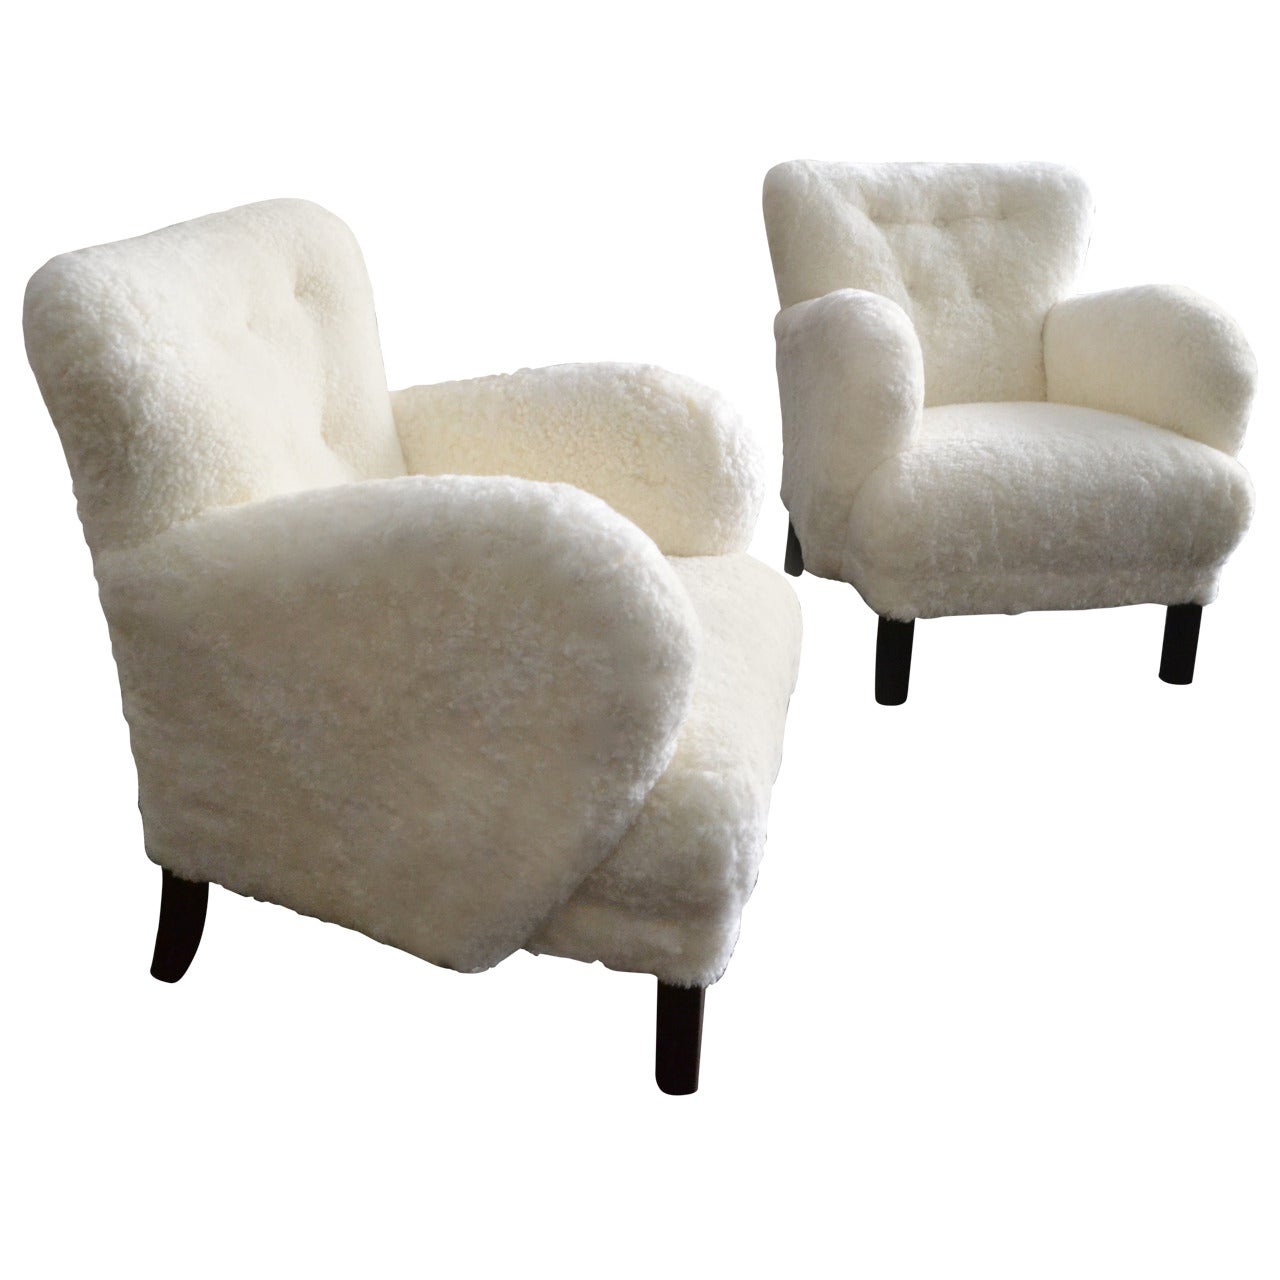 Pair of Upholstered Lounge Chairs in the Style of Viggo Boesen